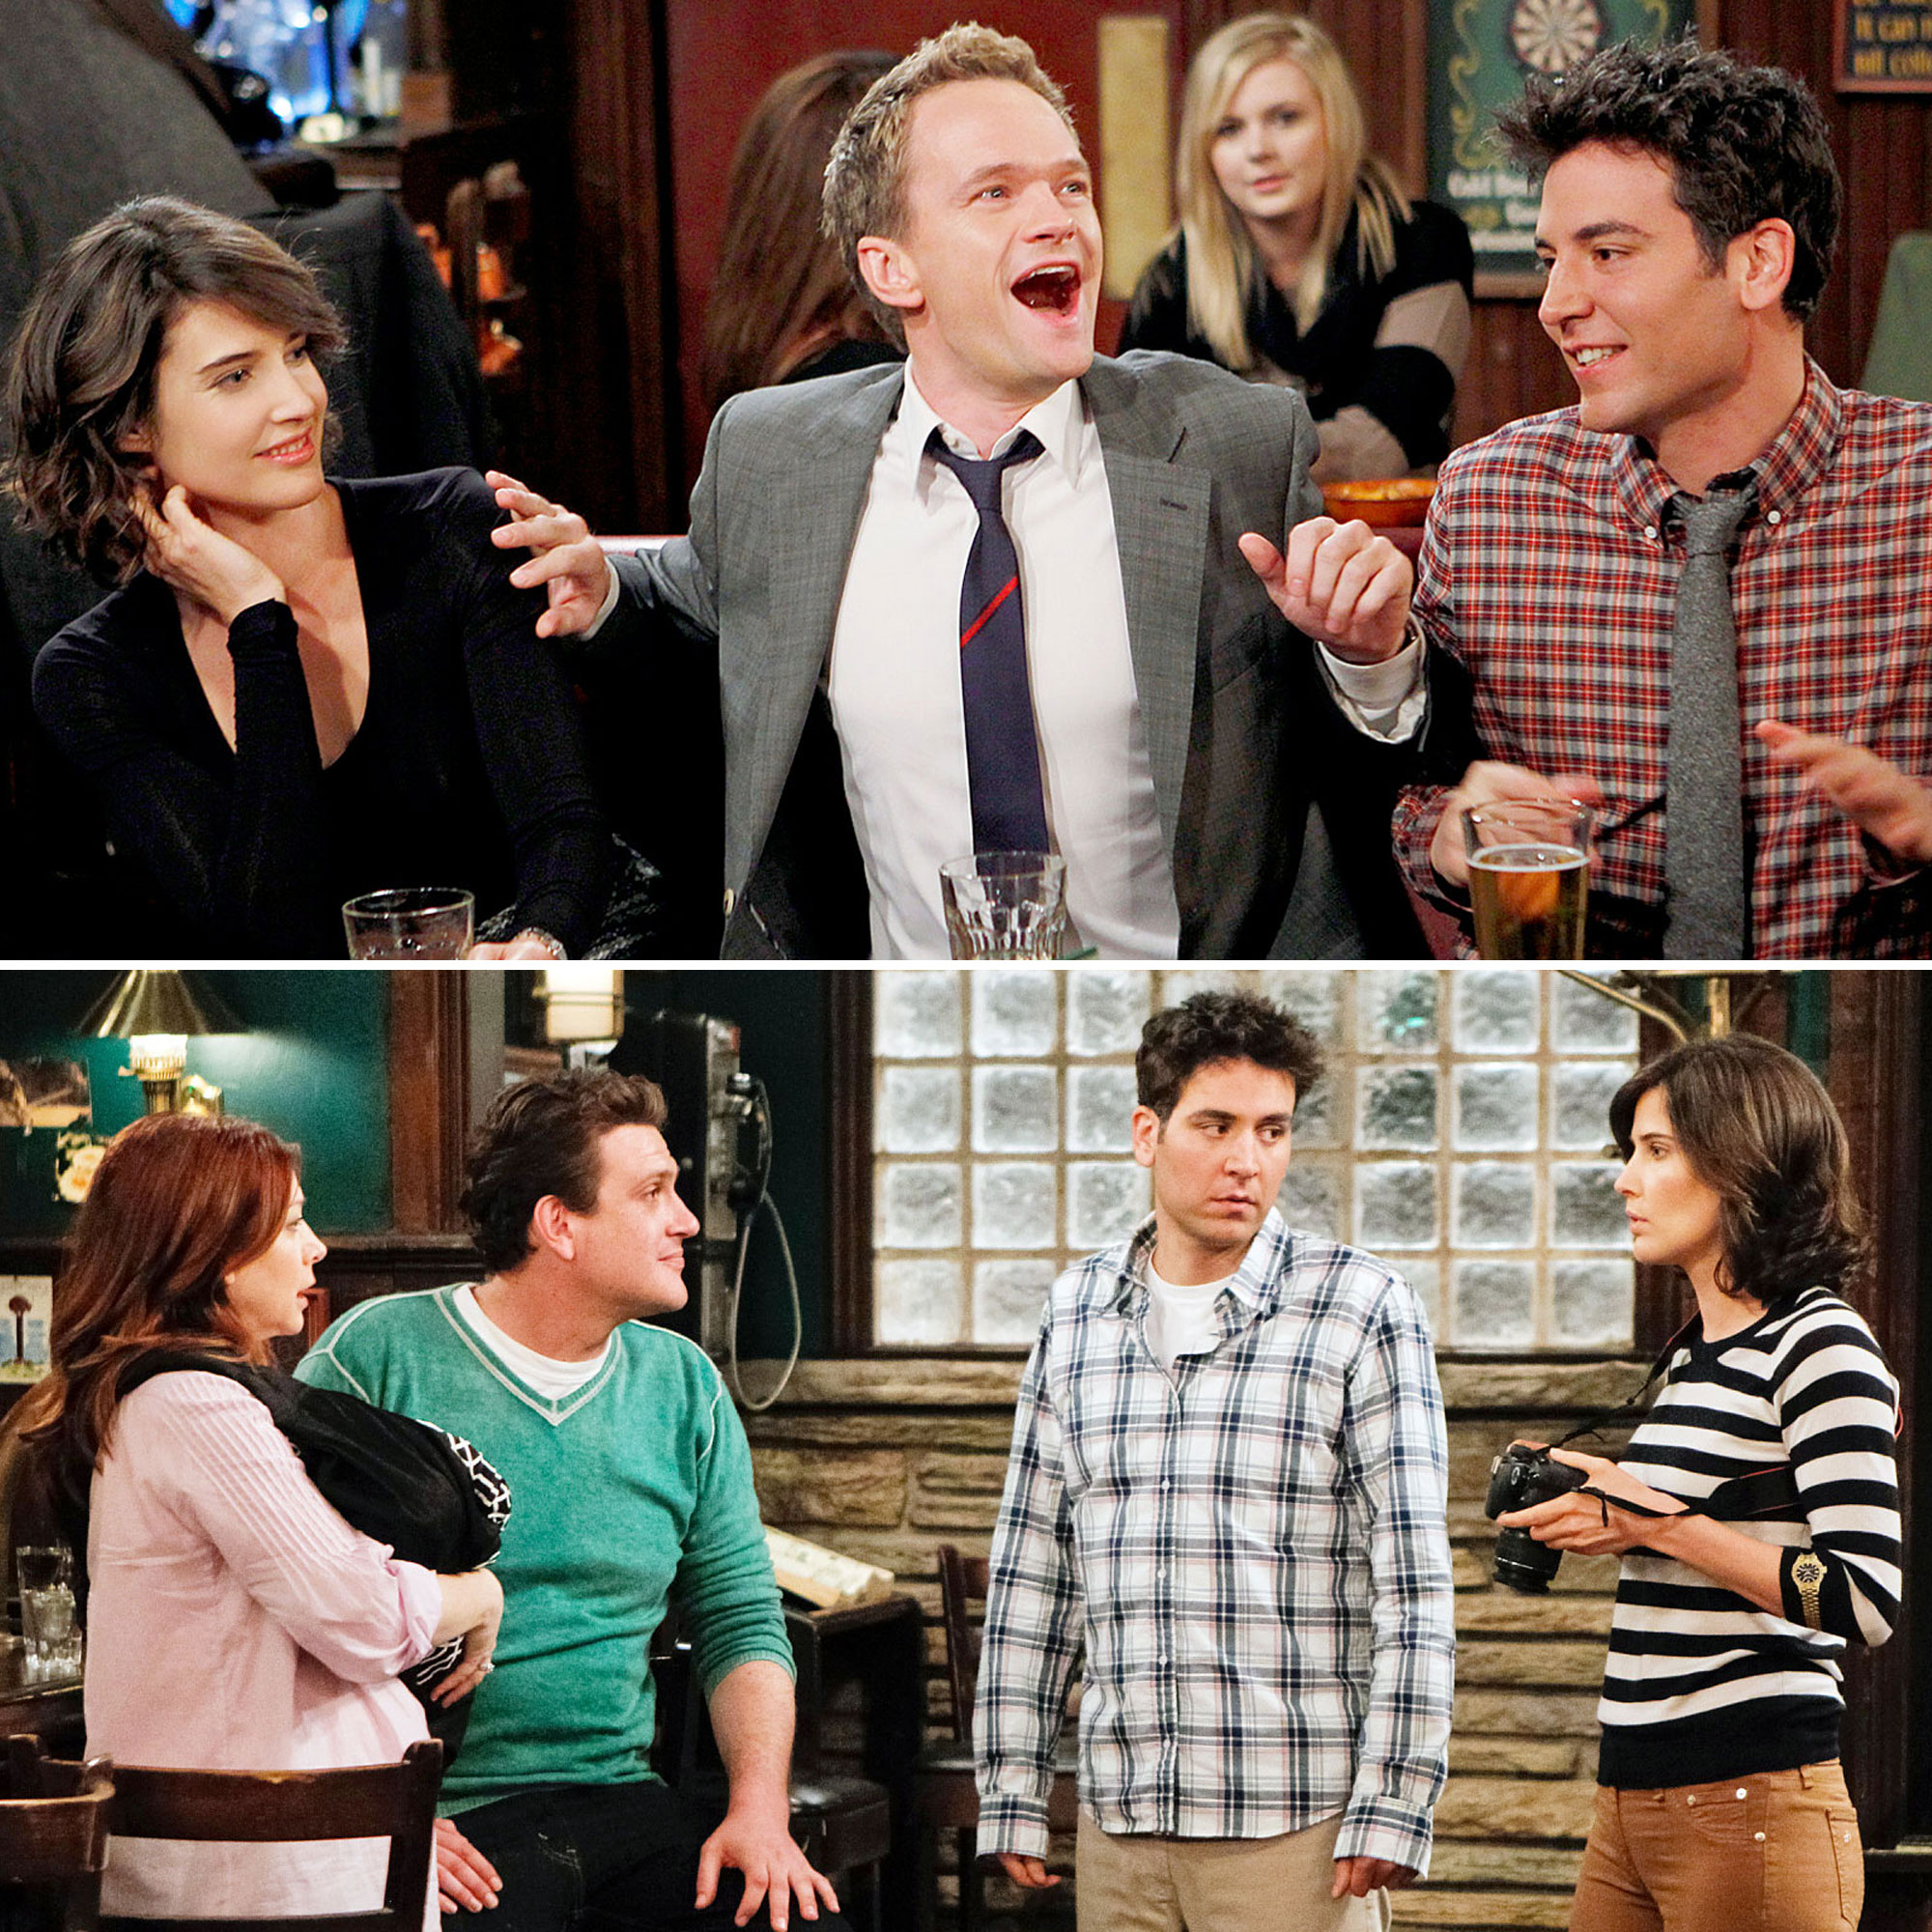 How I Met Your Mother Cast Where Are They Now?